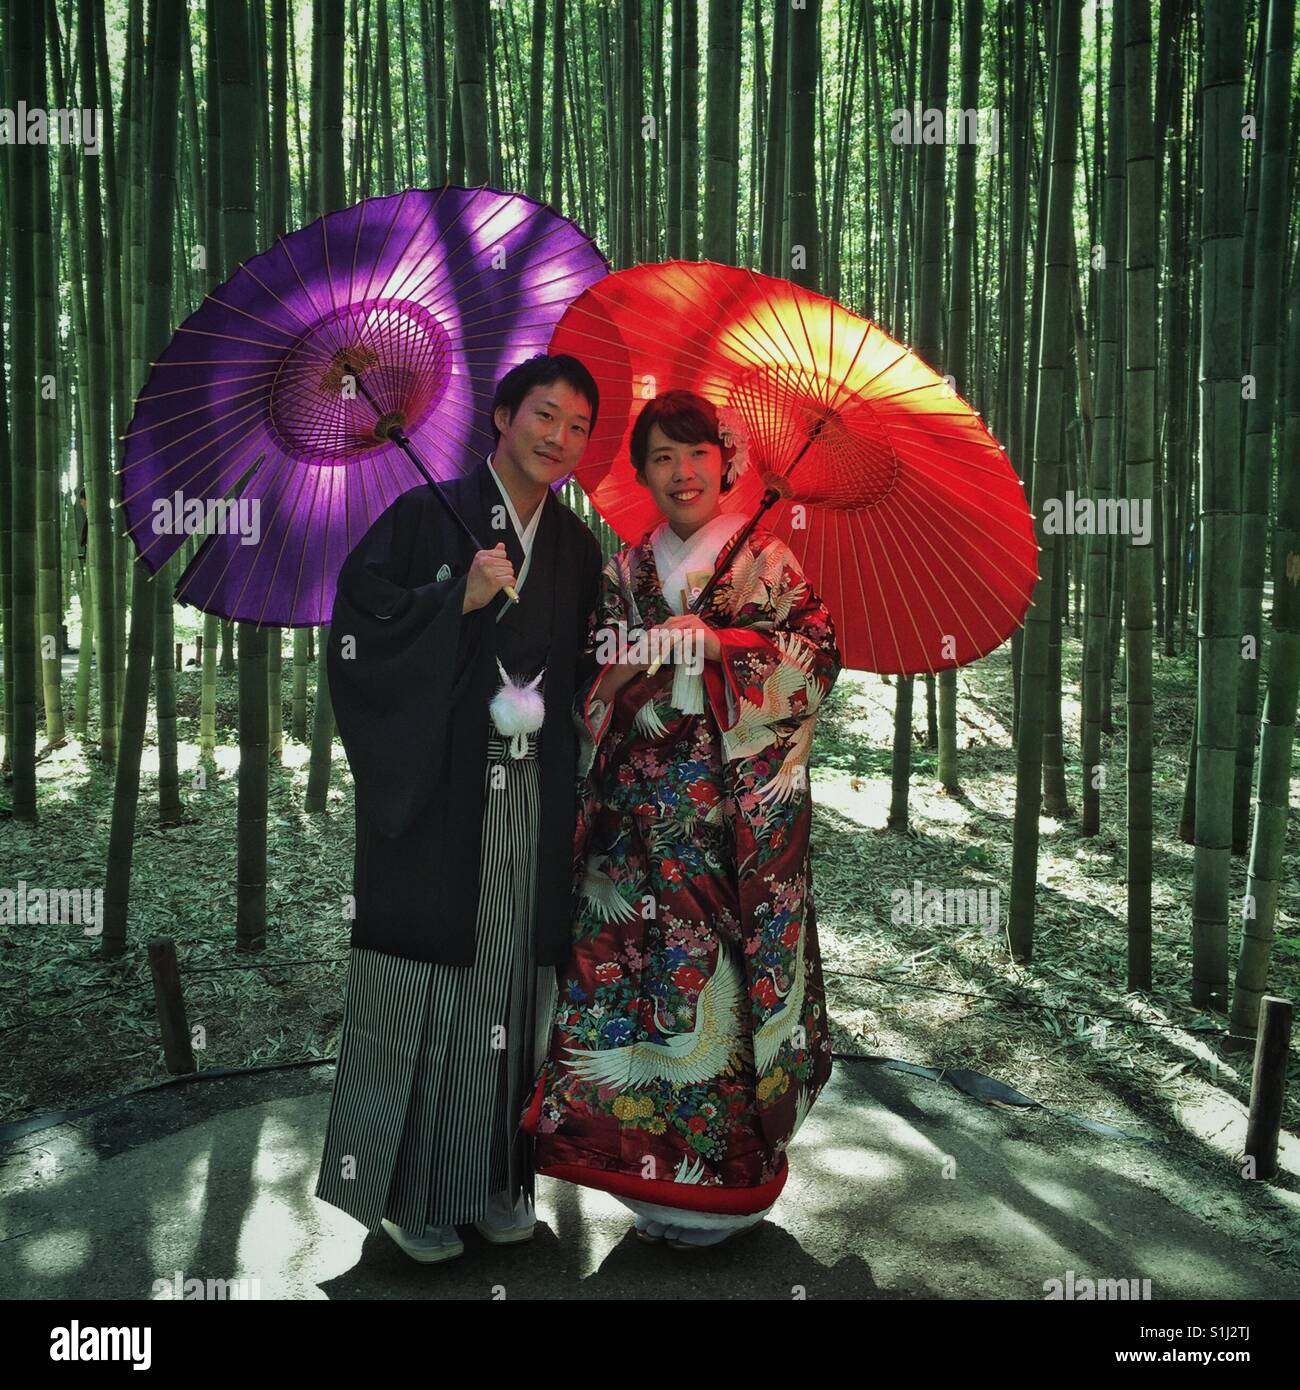 Traditionally dressed Japanese couple with red and purple umbrellas posing in front of bamboo forest in Arashiyama,Kyoto Stock Photo